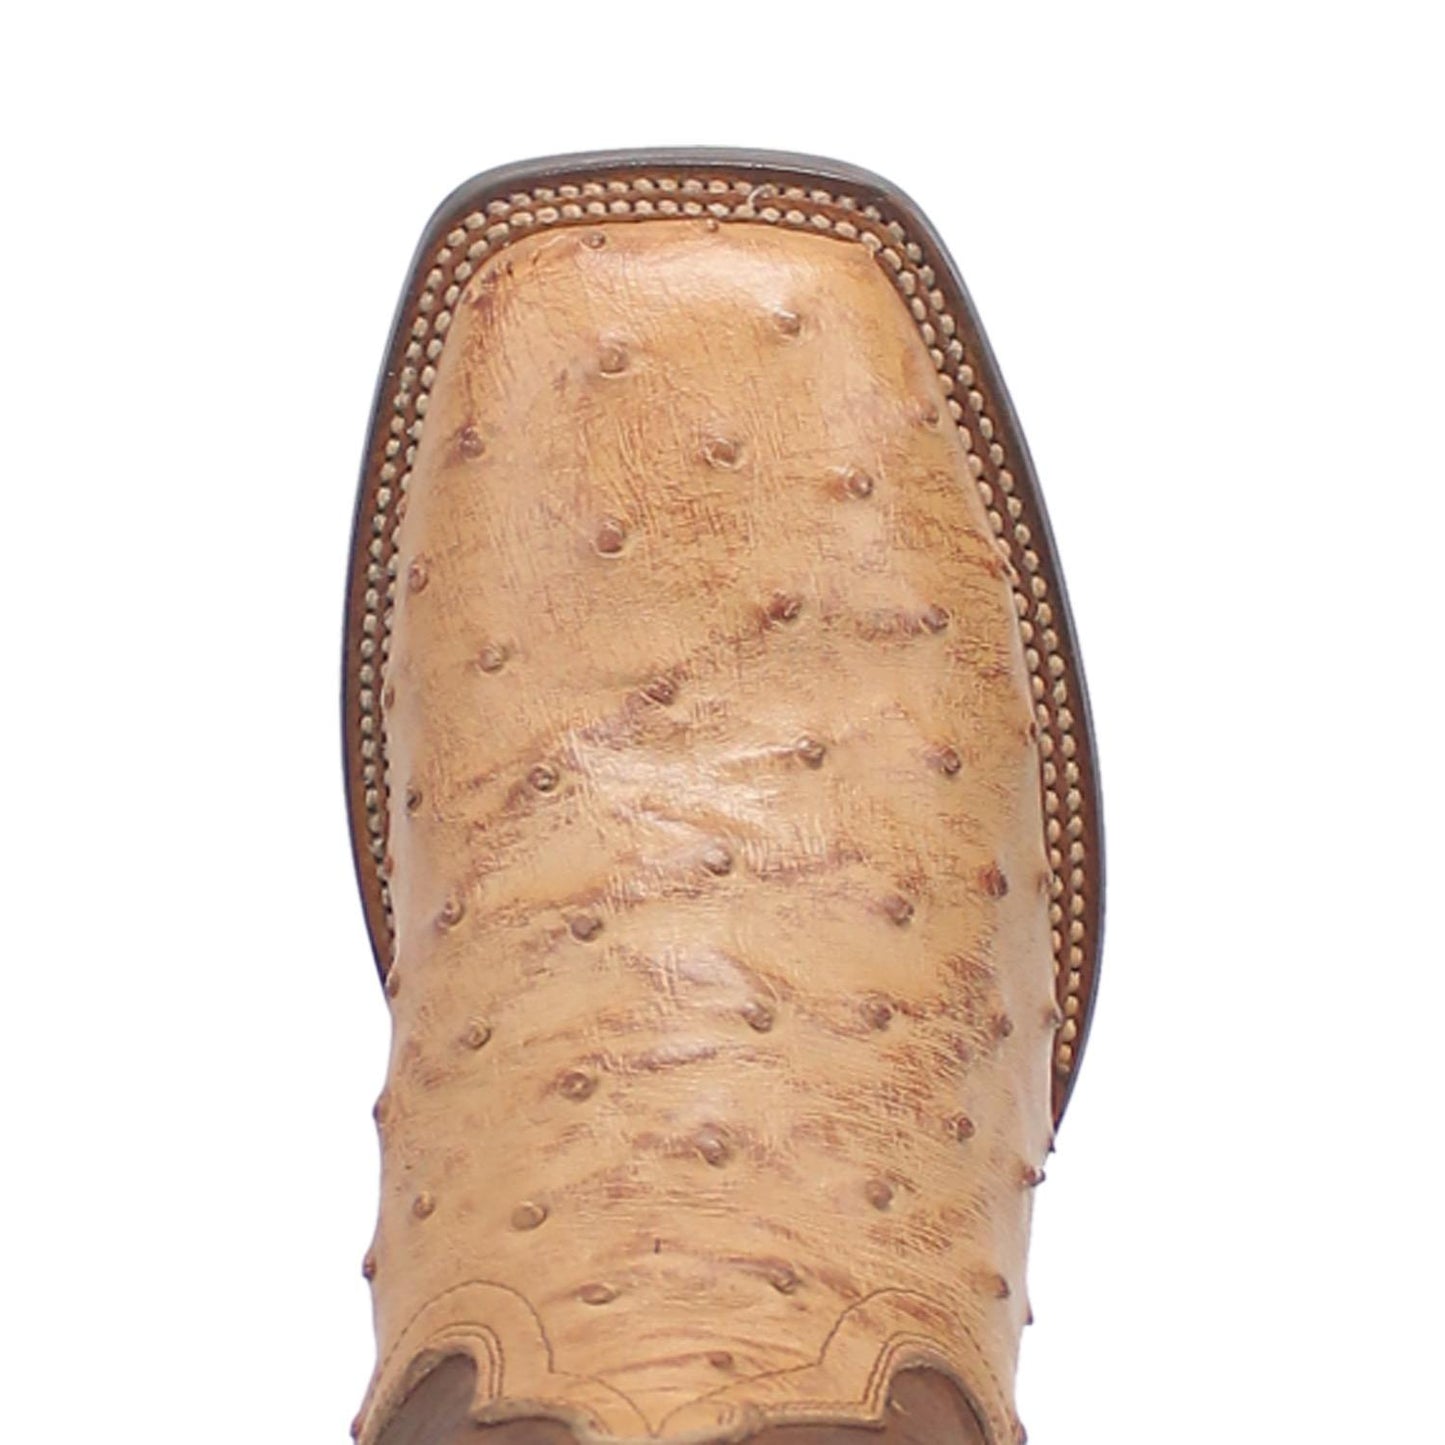 Alamosa Full Quill Ostrich - Sand/Chocolate